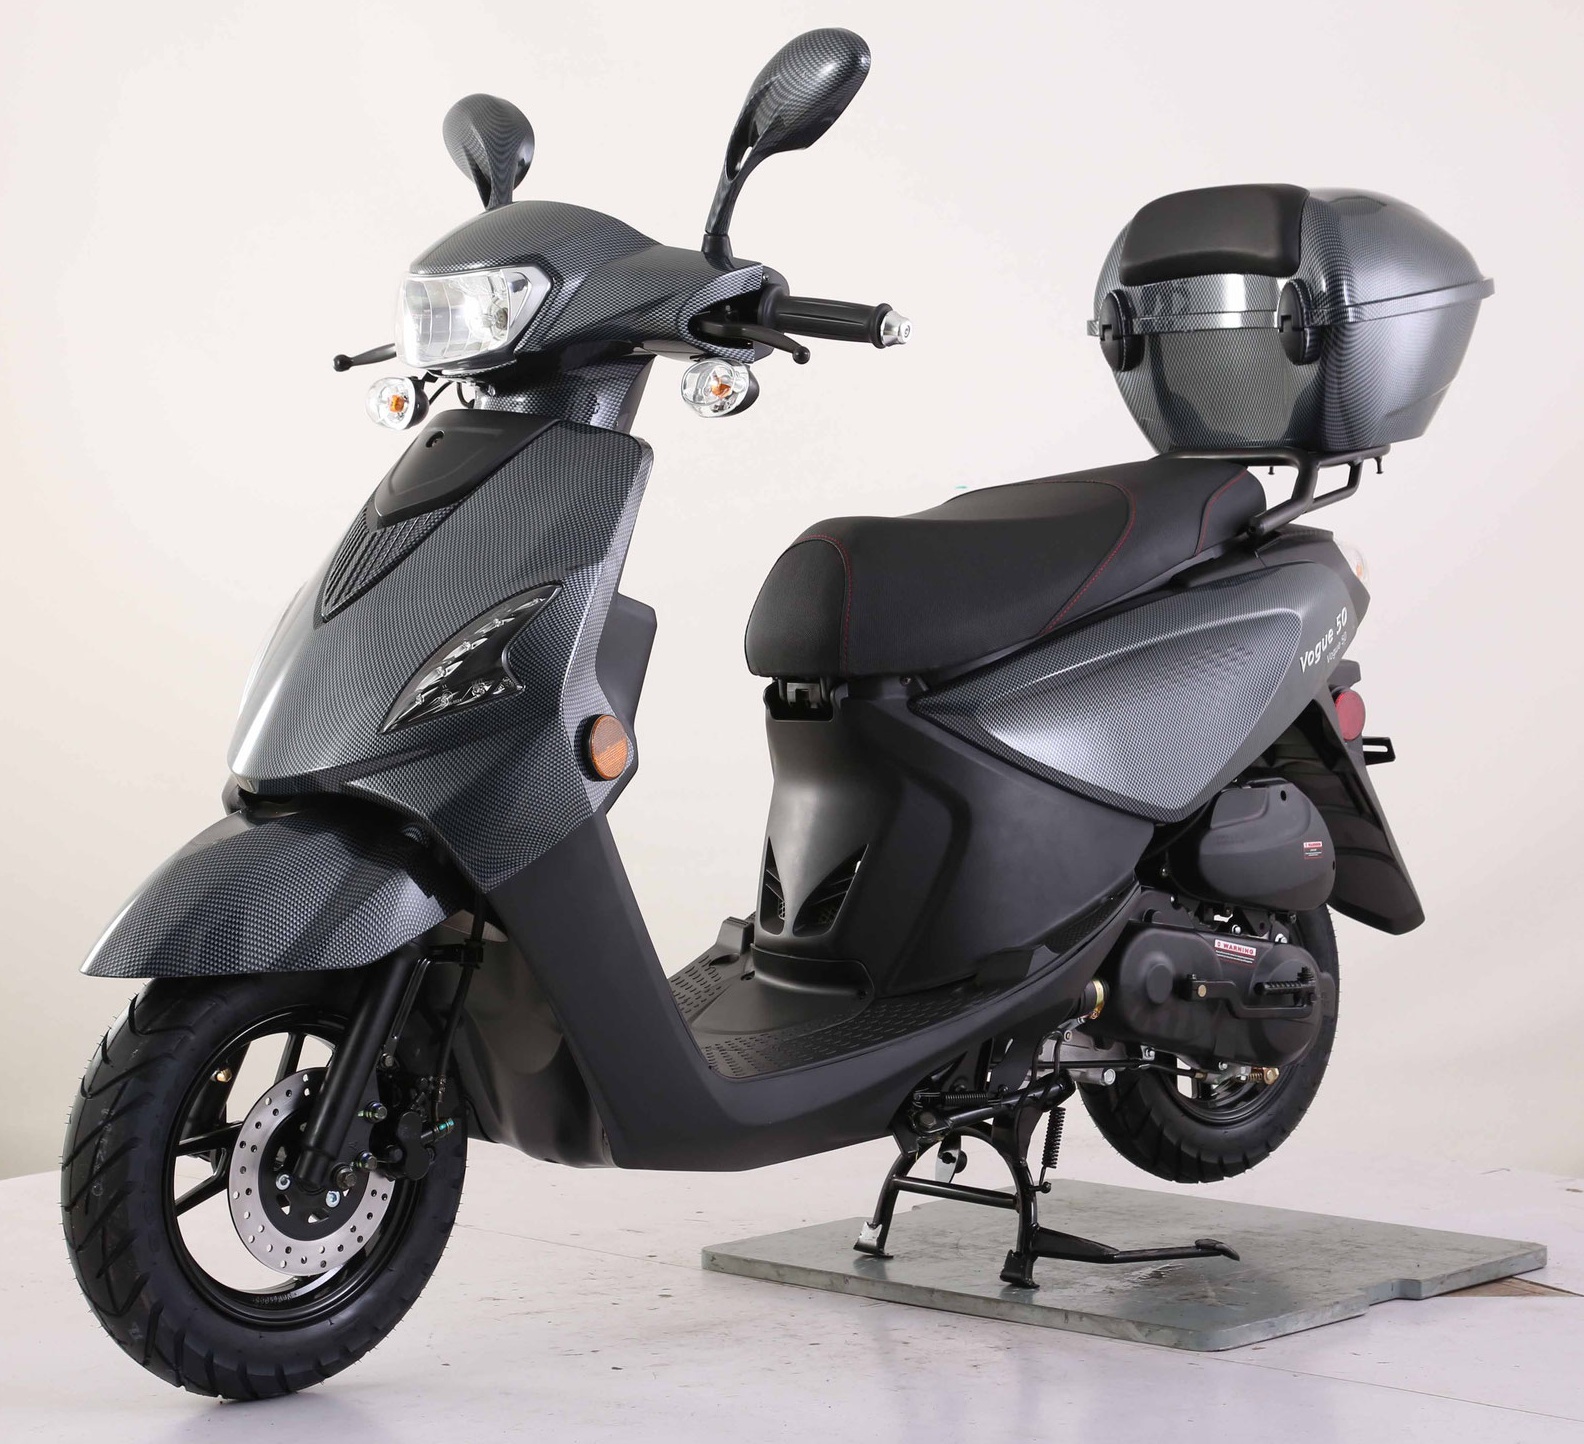 Vitacci Vogue 50Cc Scooter with Single Cylinder, 4 Stroke, Air-Cooled Engine and 10 Inch Aluminum Rims